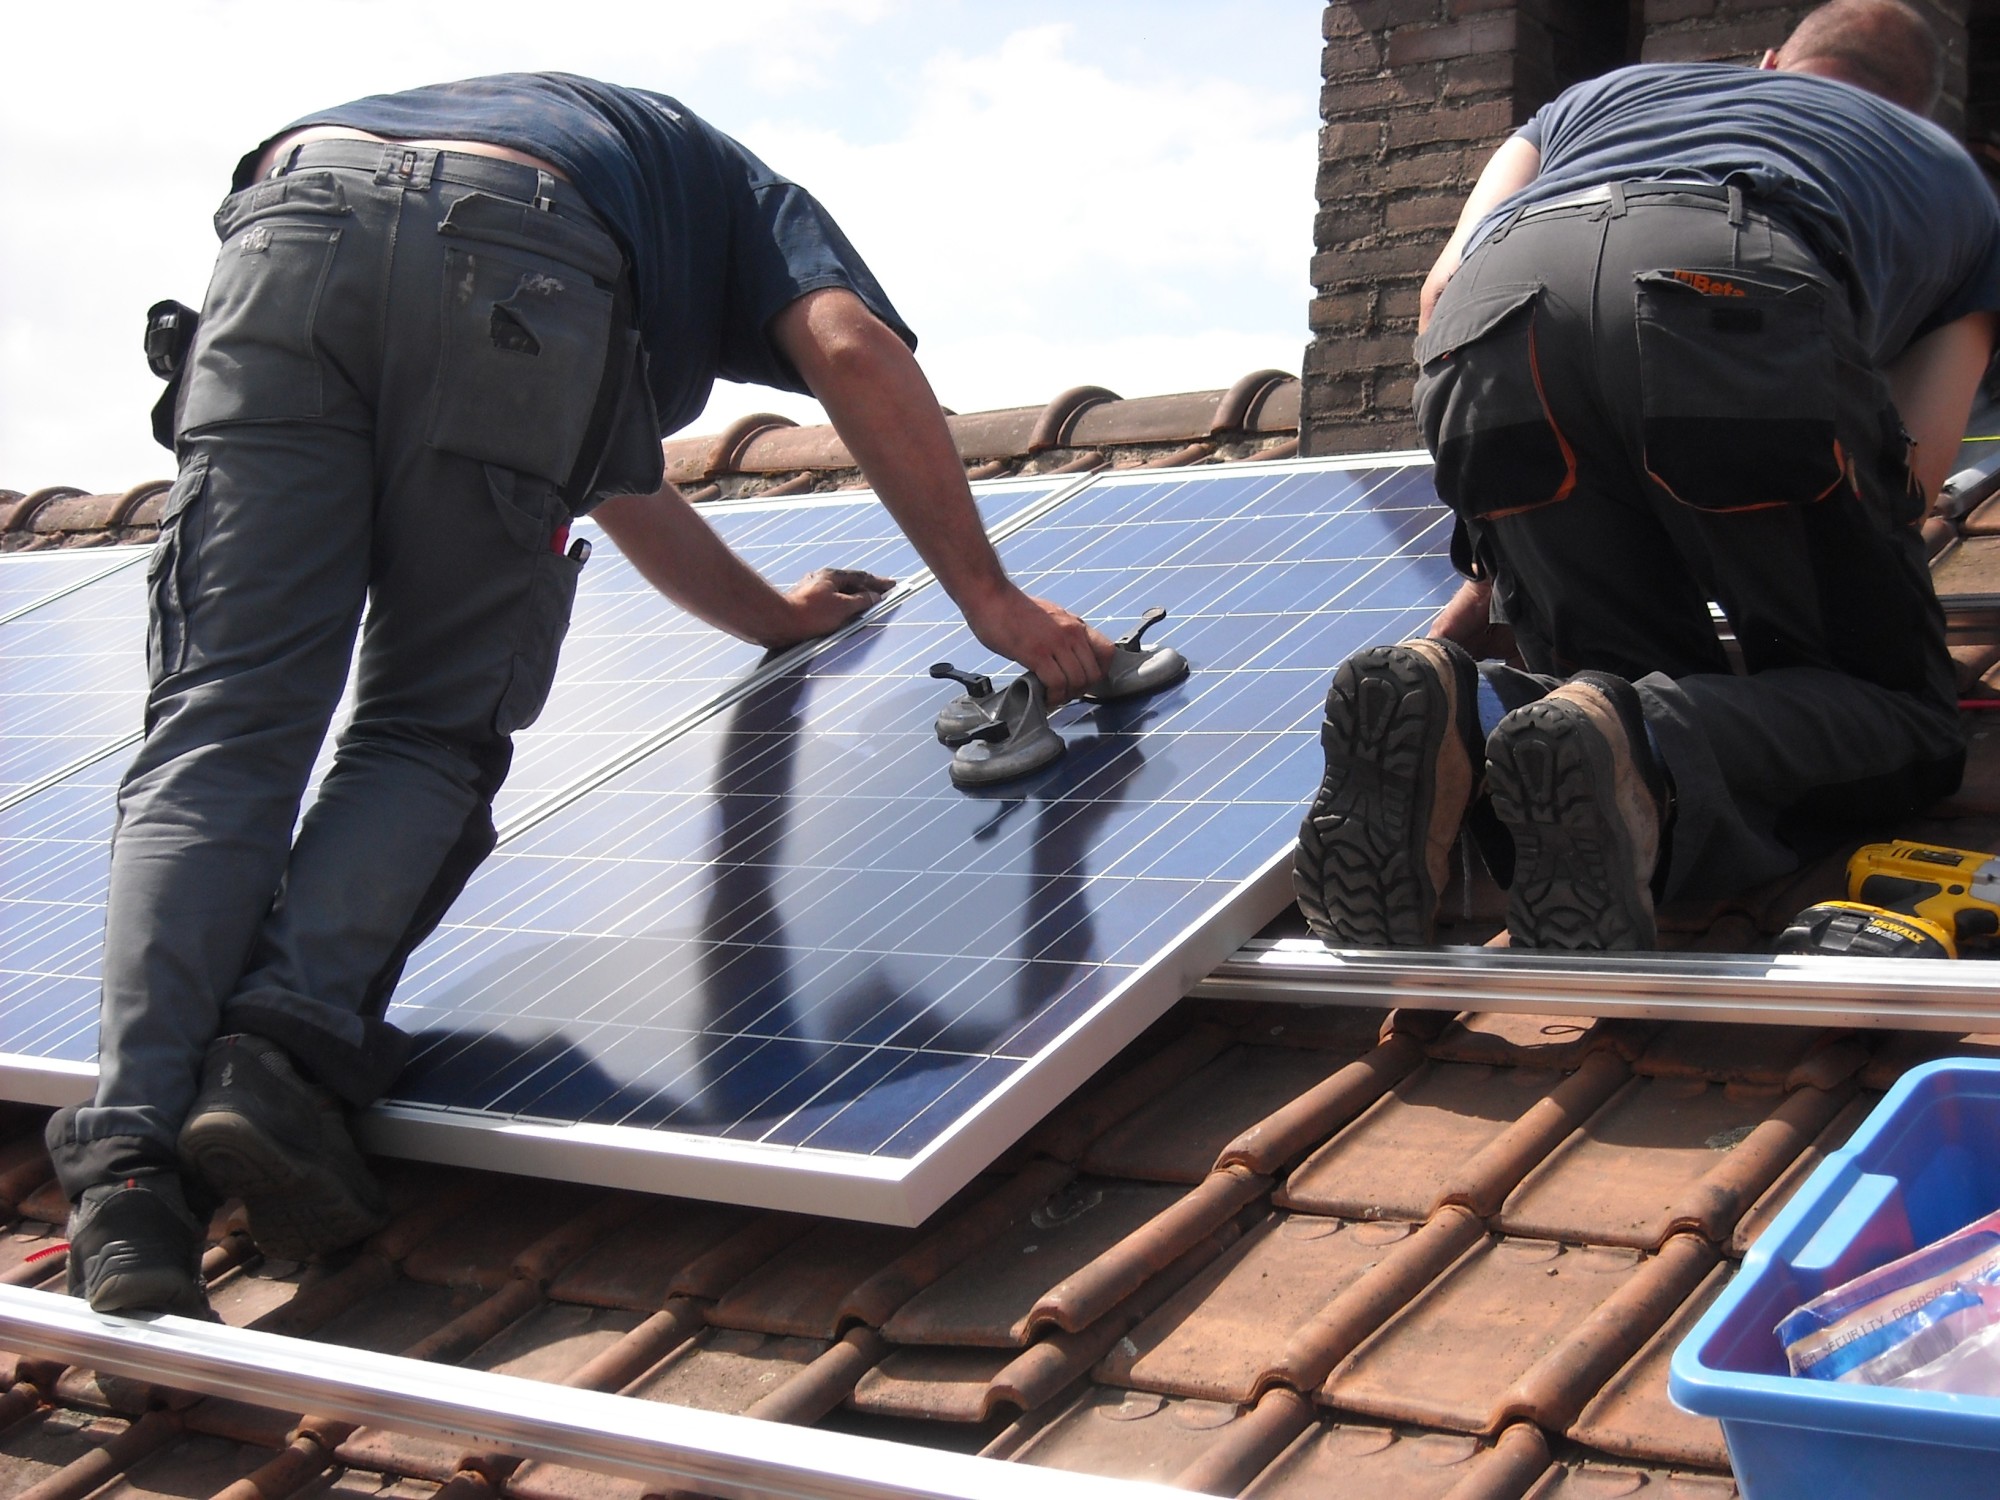 Solar panel supplier near me: Do you want to know how to choose the right solar installer? Read on to learn how to make the right choice.